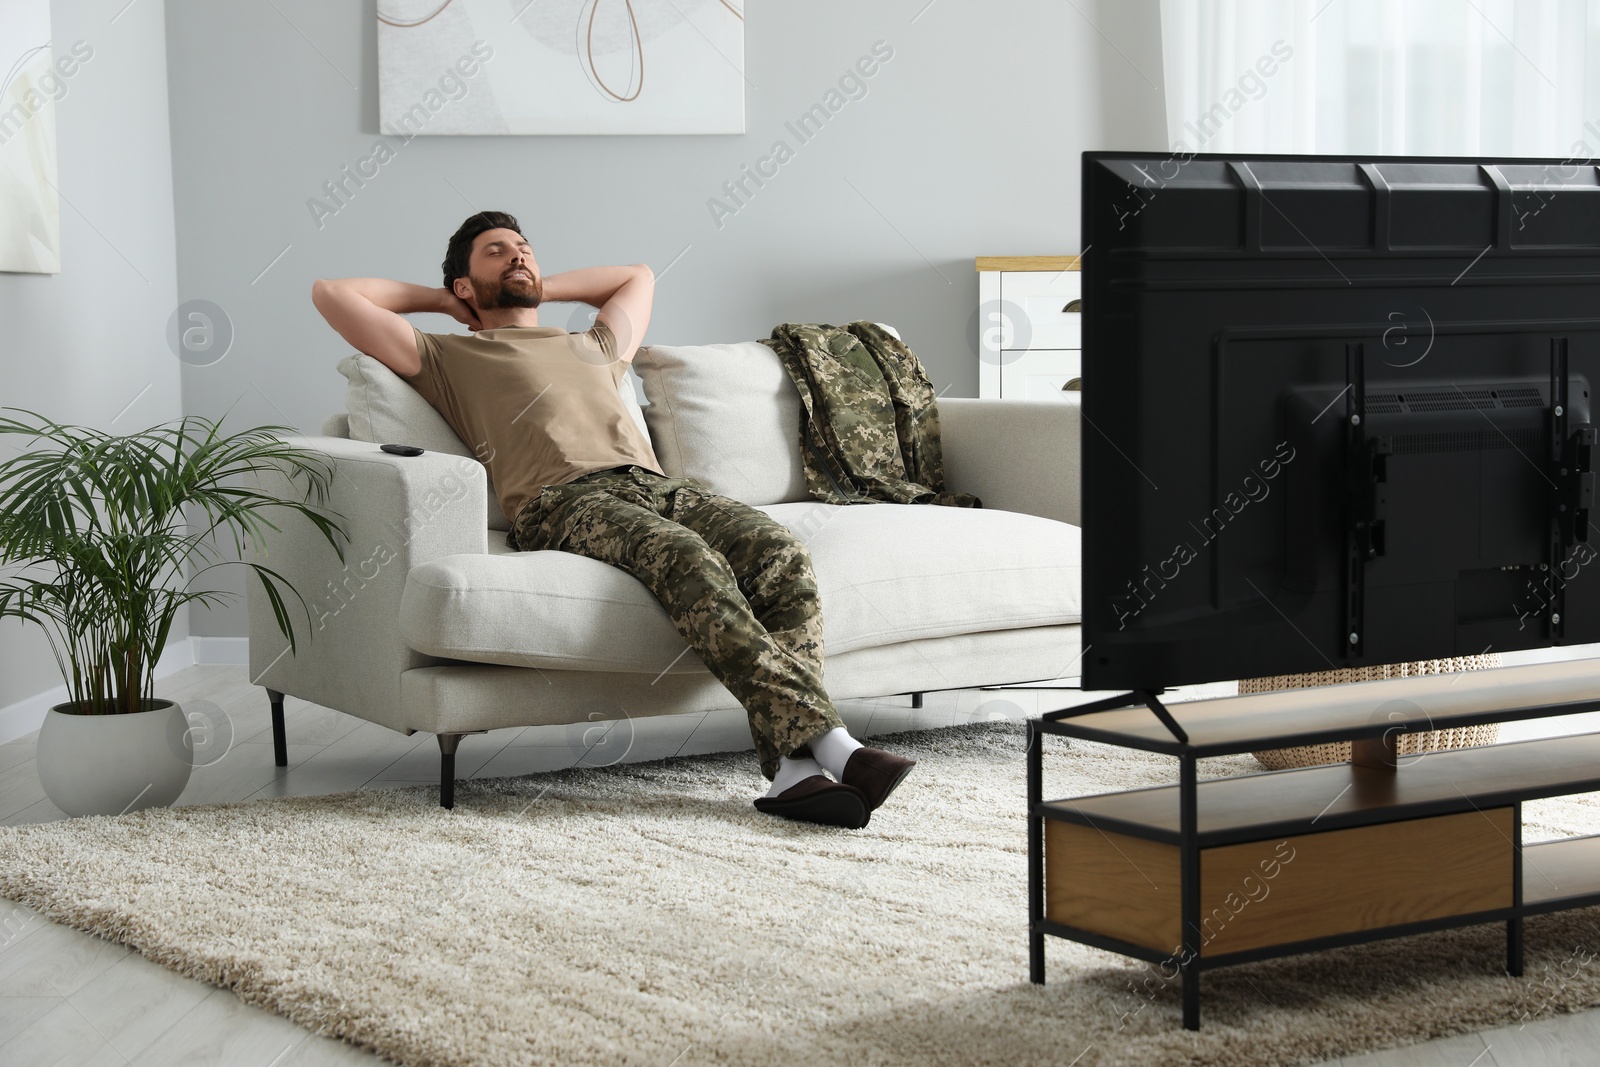 Photo of Soldier napping on soft sofa near TV in living room. Military service